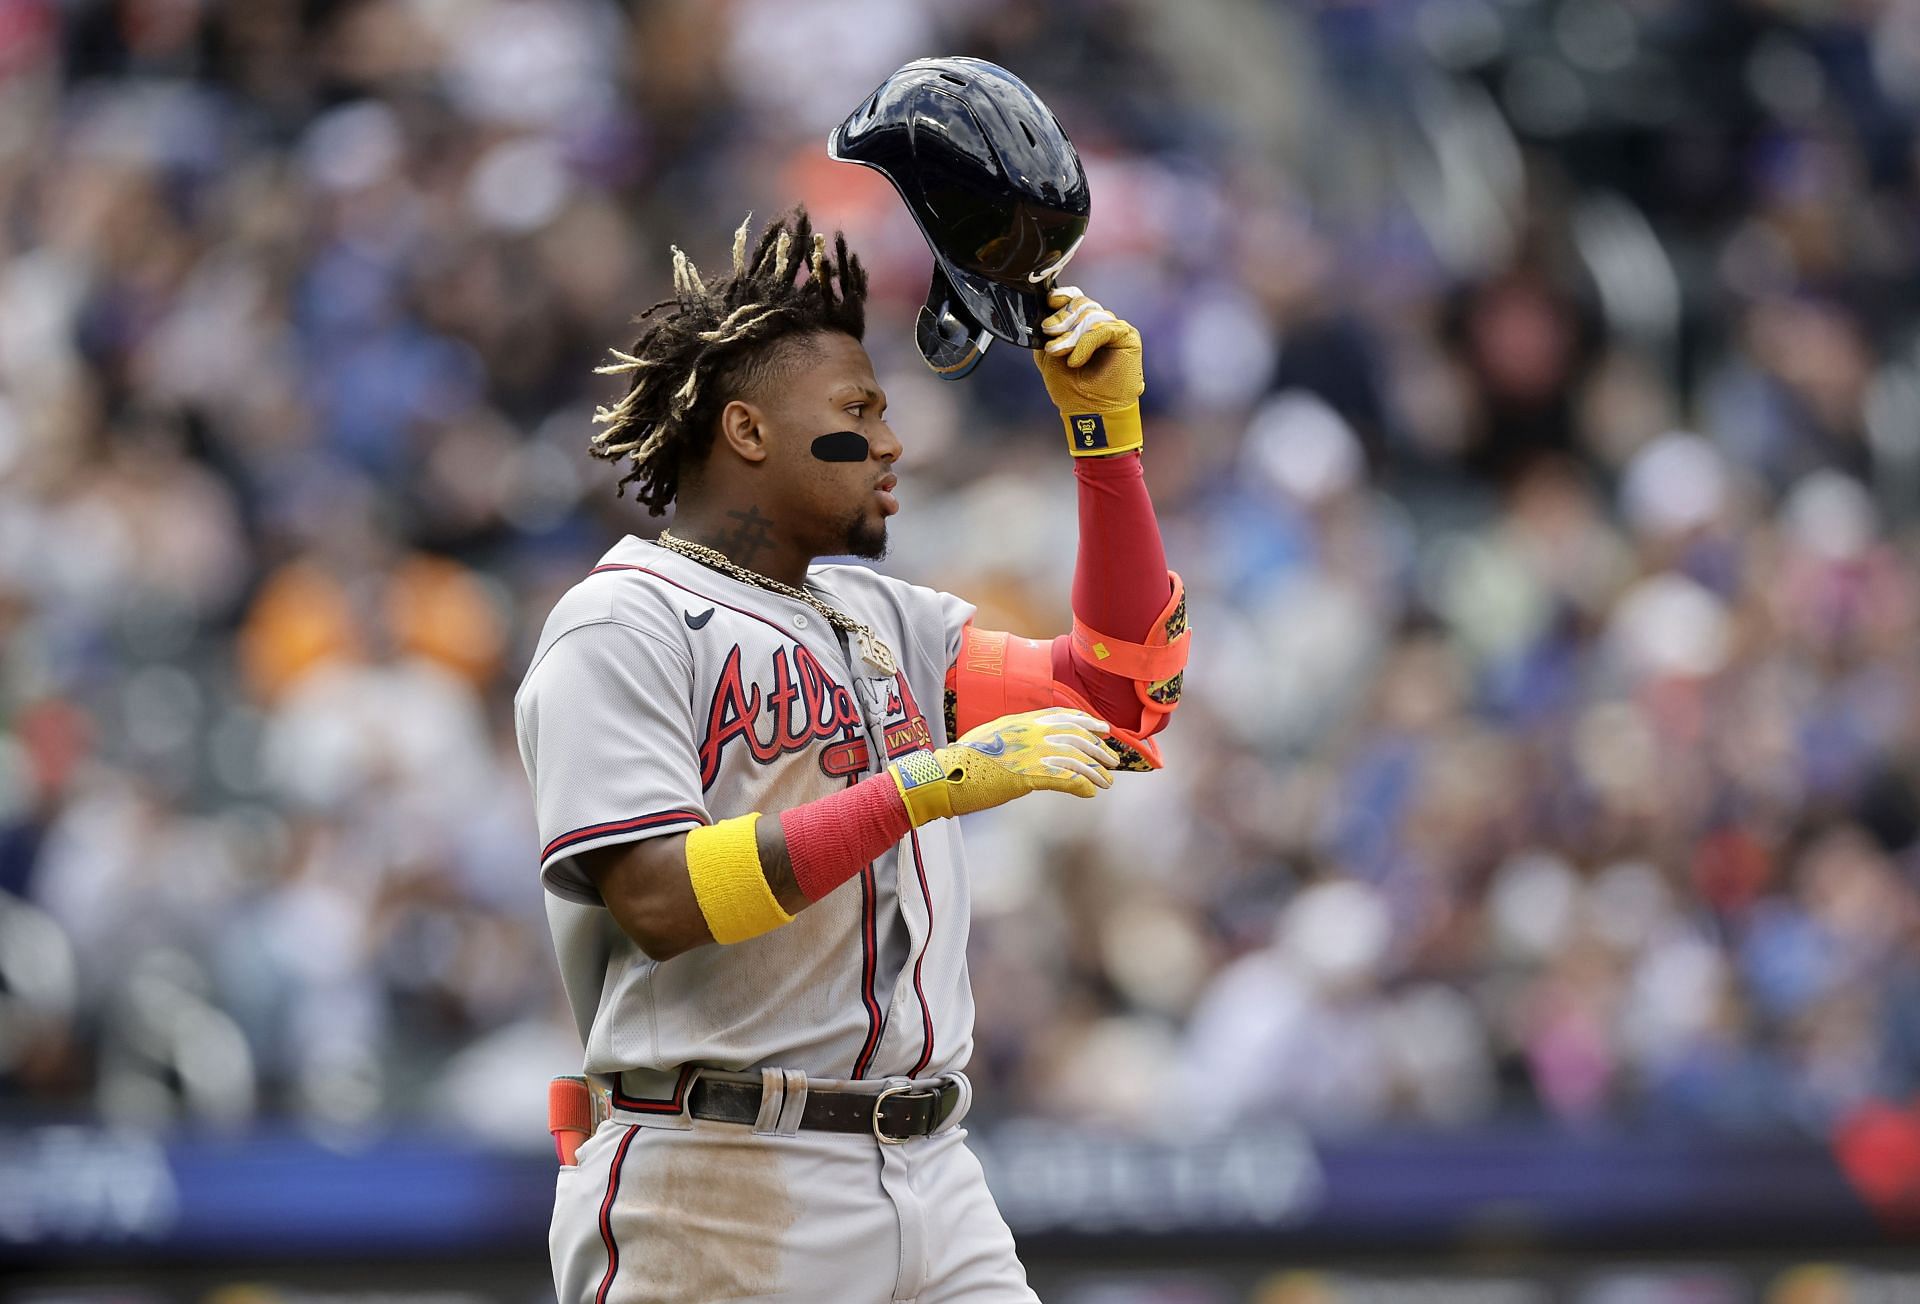 Mets make dramatic play to nab Braves star Ronald Acuna Jr. on